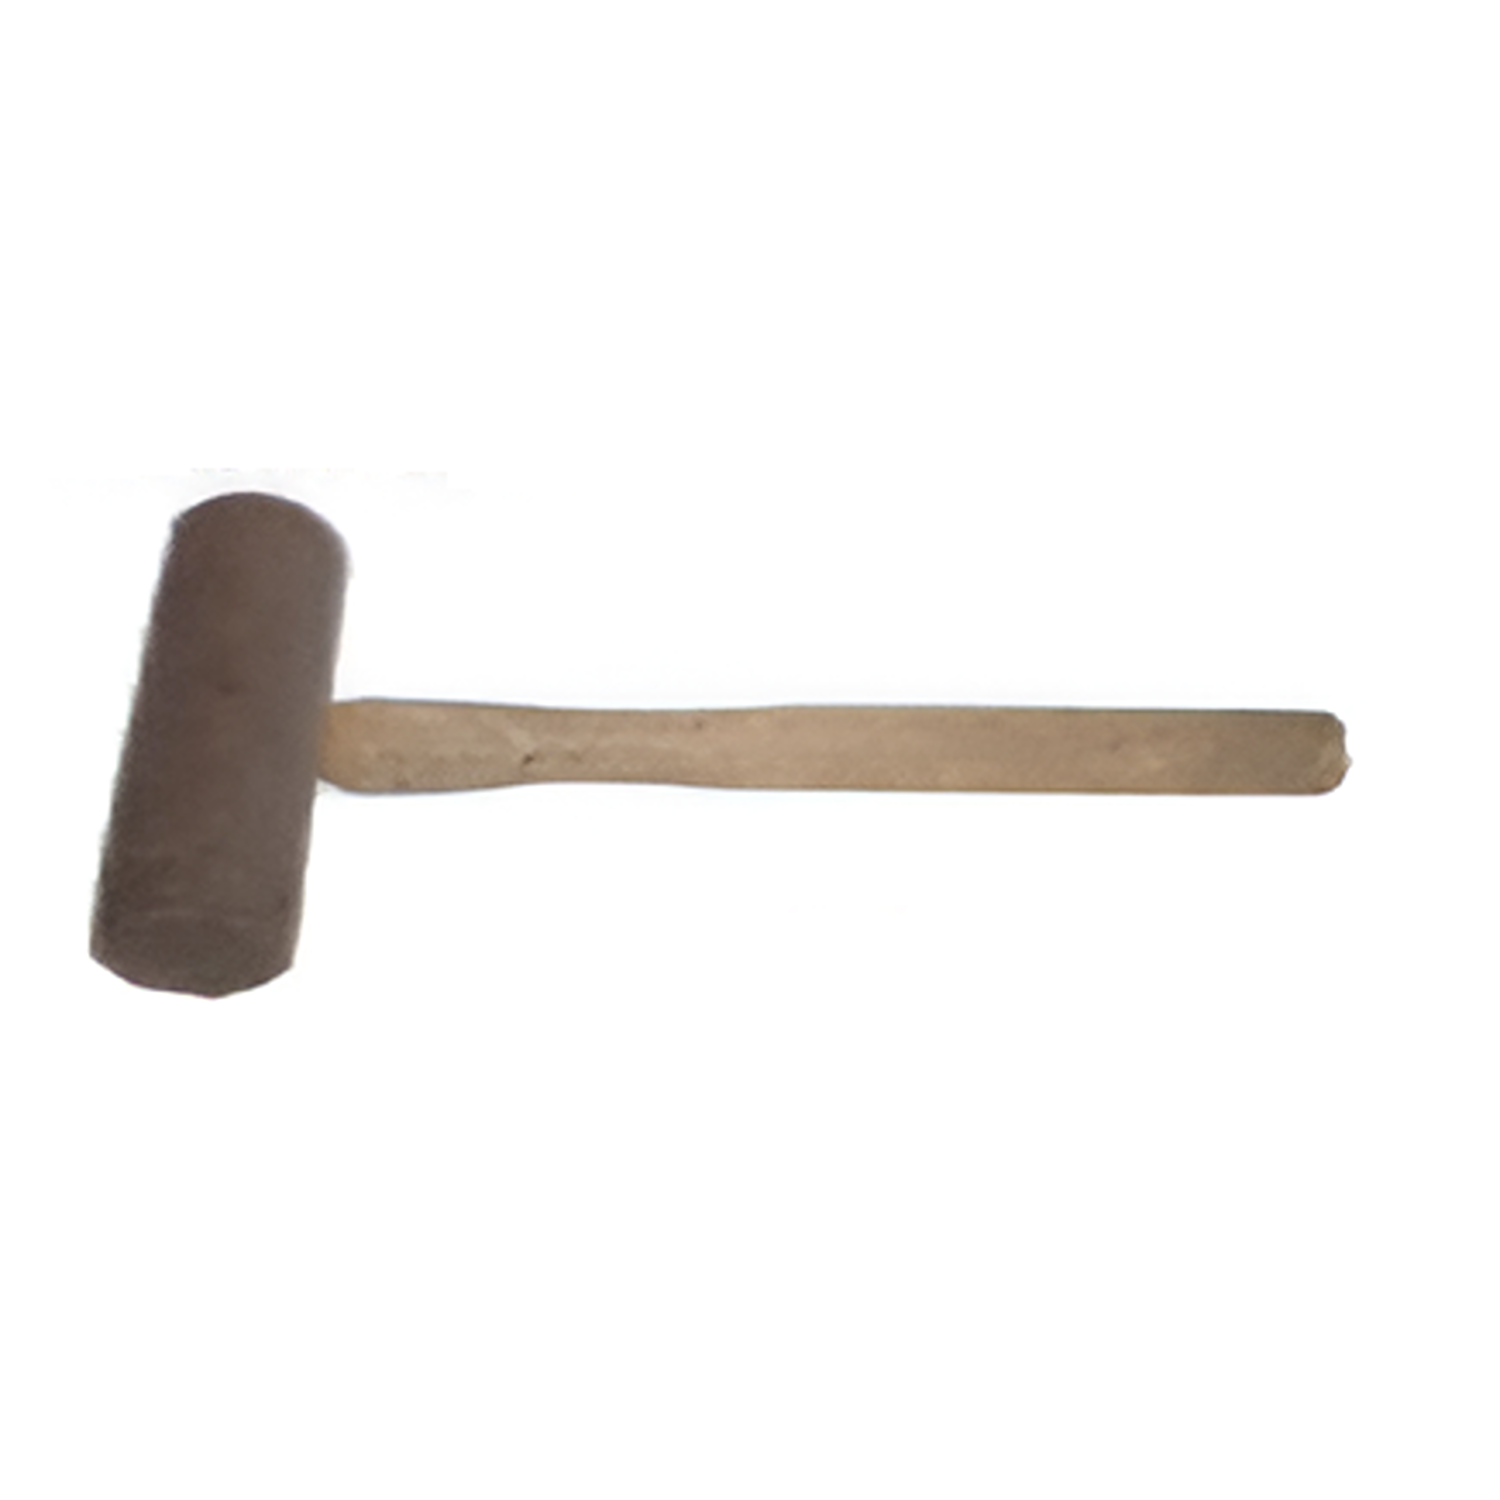 YEW AIK AI 00189 - AI 00193 Wooden Hammer - Premium Wooden Hammer from YEW AIK - Shop now at Yew Aik.